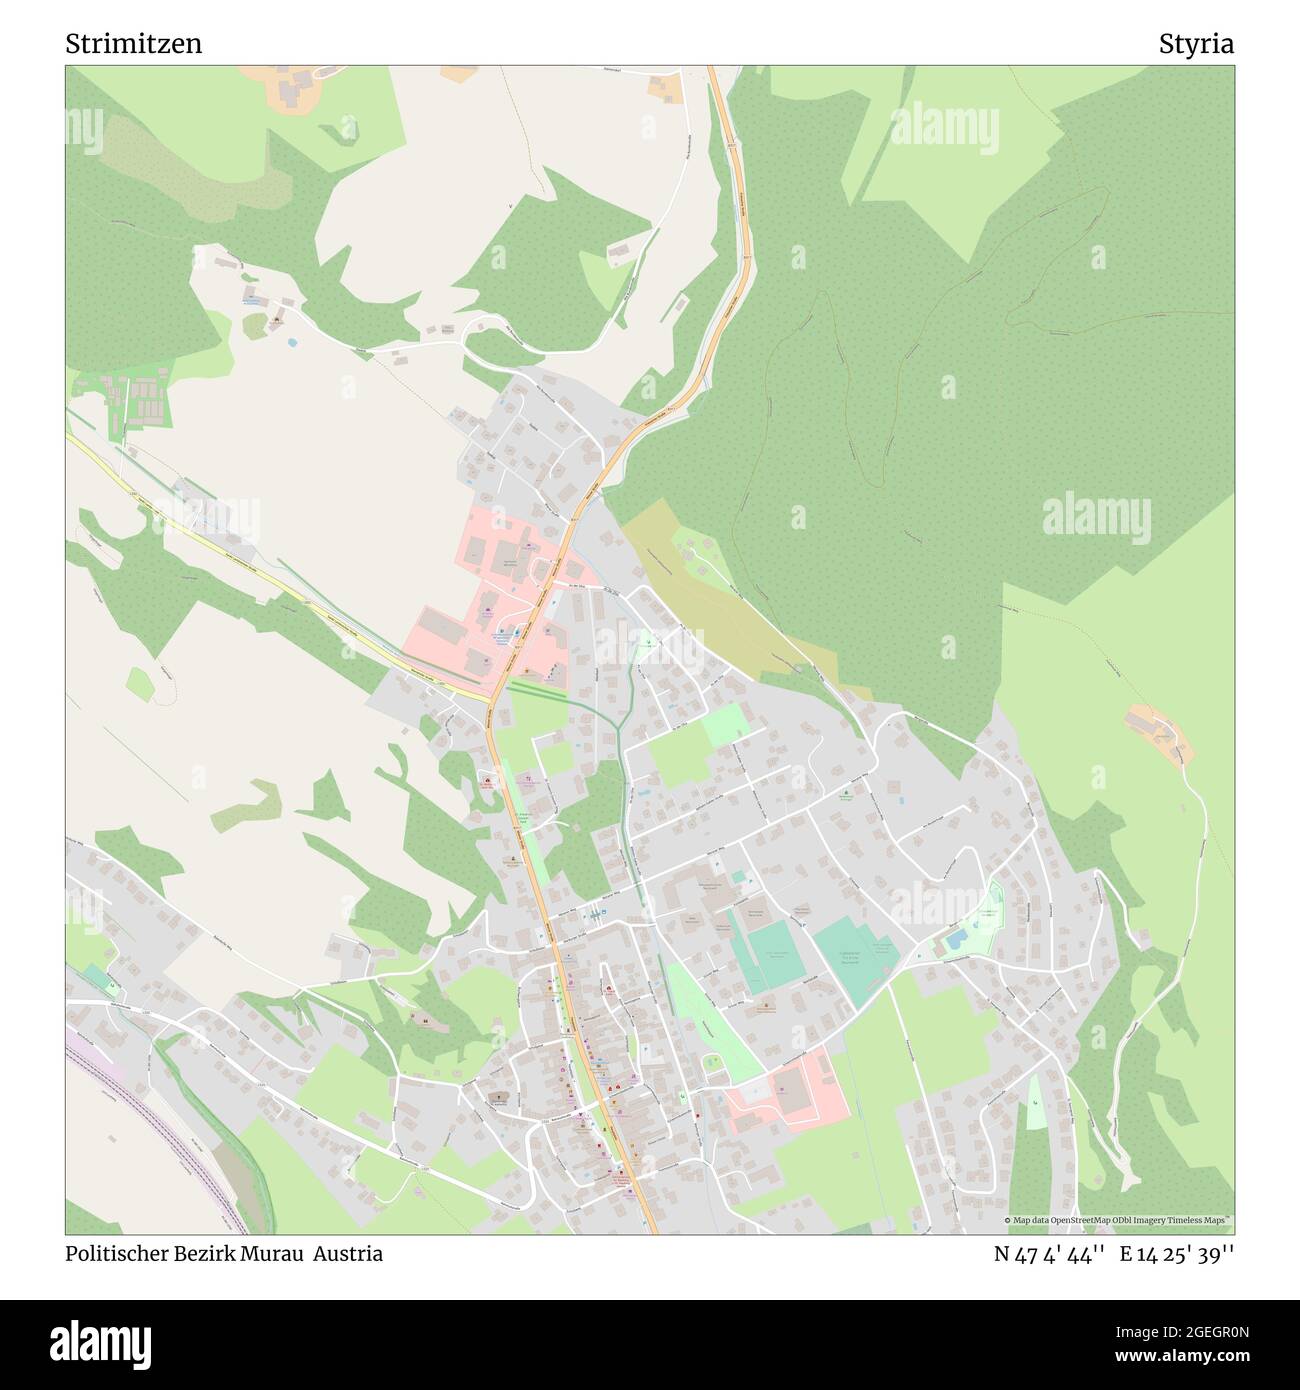 Strimitzen, Politischer Bezirk Murau, Austria, Styria, N 47 4' 44'', E 14 25' 39'', map, Timeless Map published in 2021. Travelers, explorers and adventurers like Florence Nightingale, David Livingstone, Ernest Shackleton, Lewis and Clark and Sherlock Holmes relied on maps to plan travels to the world's most remote corners, Timeless Maps is mapping most locations on the globe, showing the achievement of great dreams Stock Photo